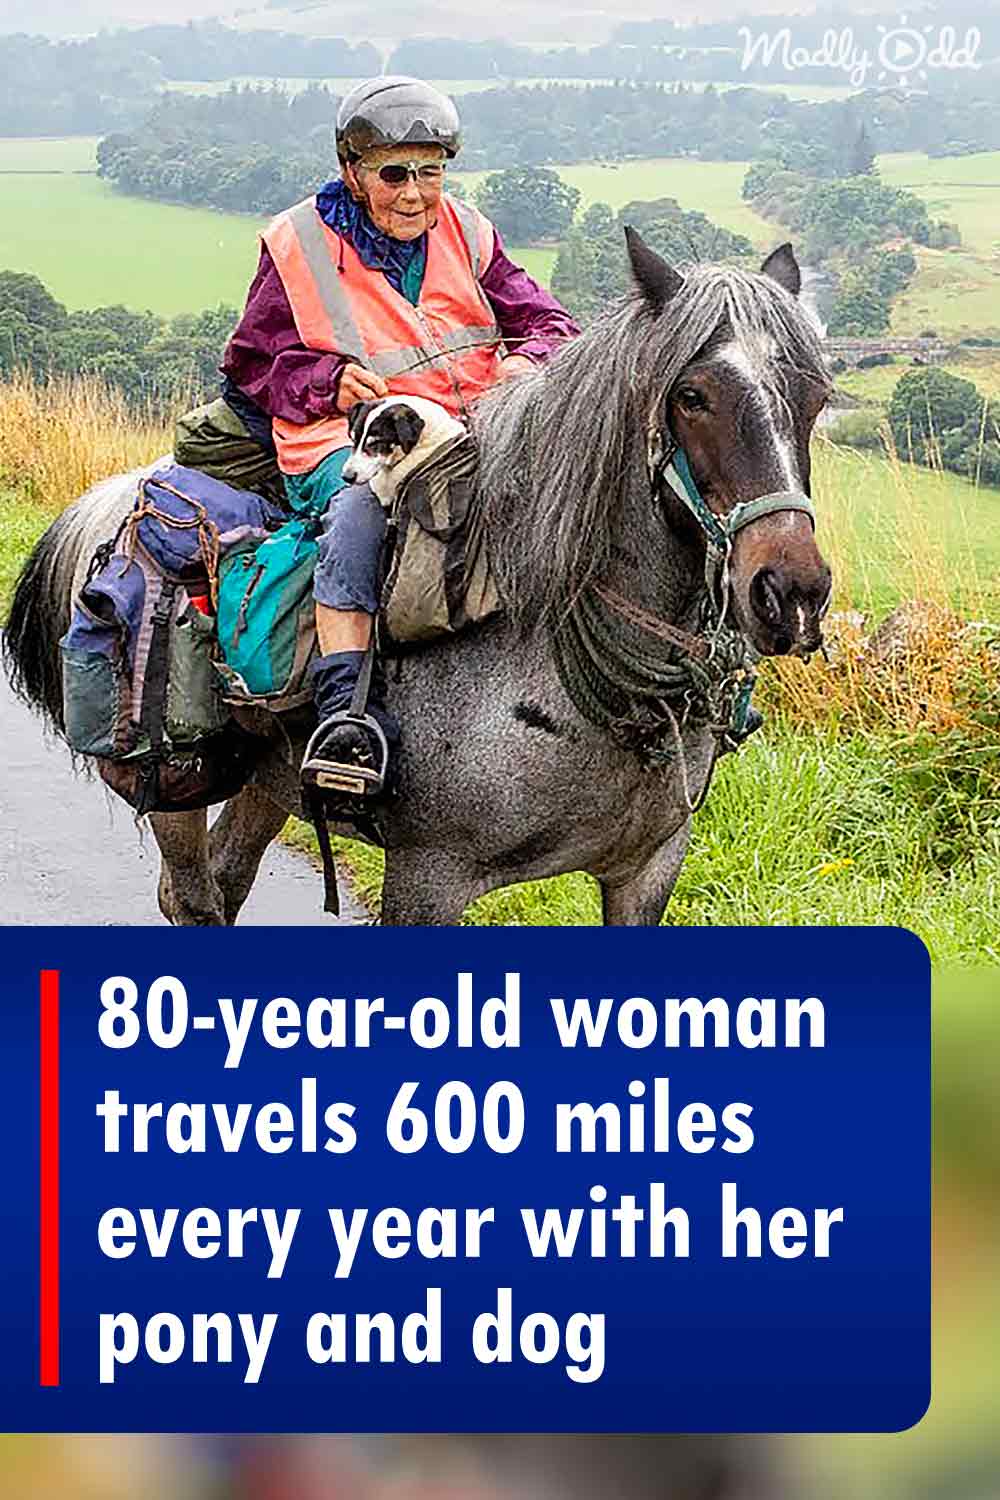 80-year-old woman travels 600 miles every year with her pony and dog